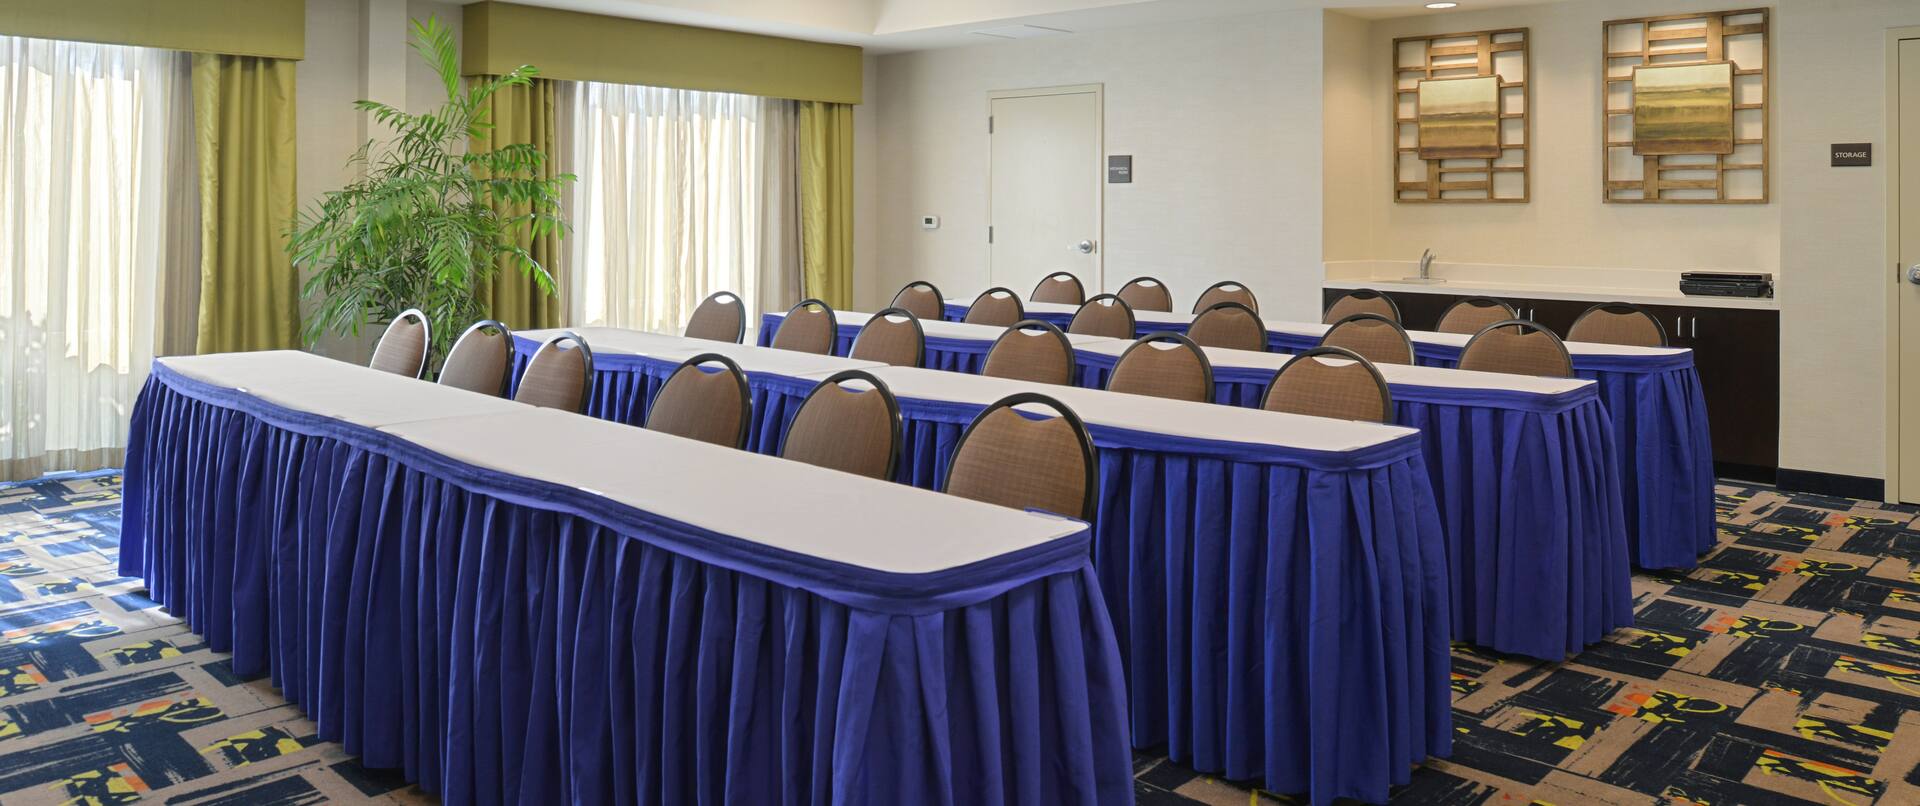 Meeting Space Classroom Style  